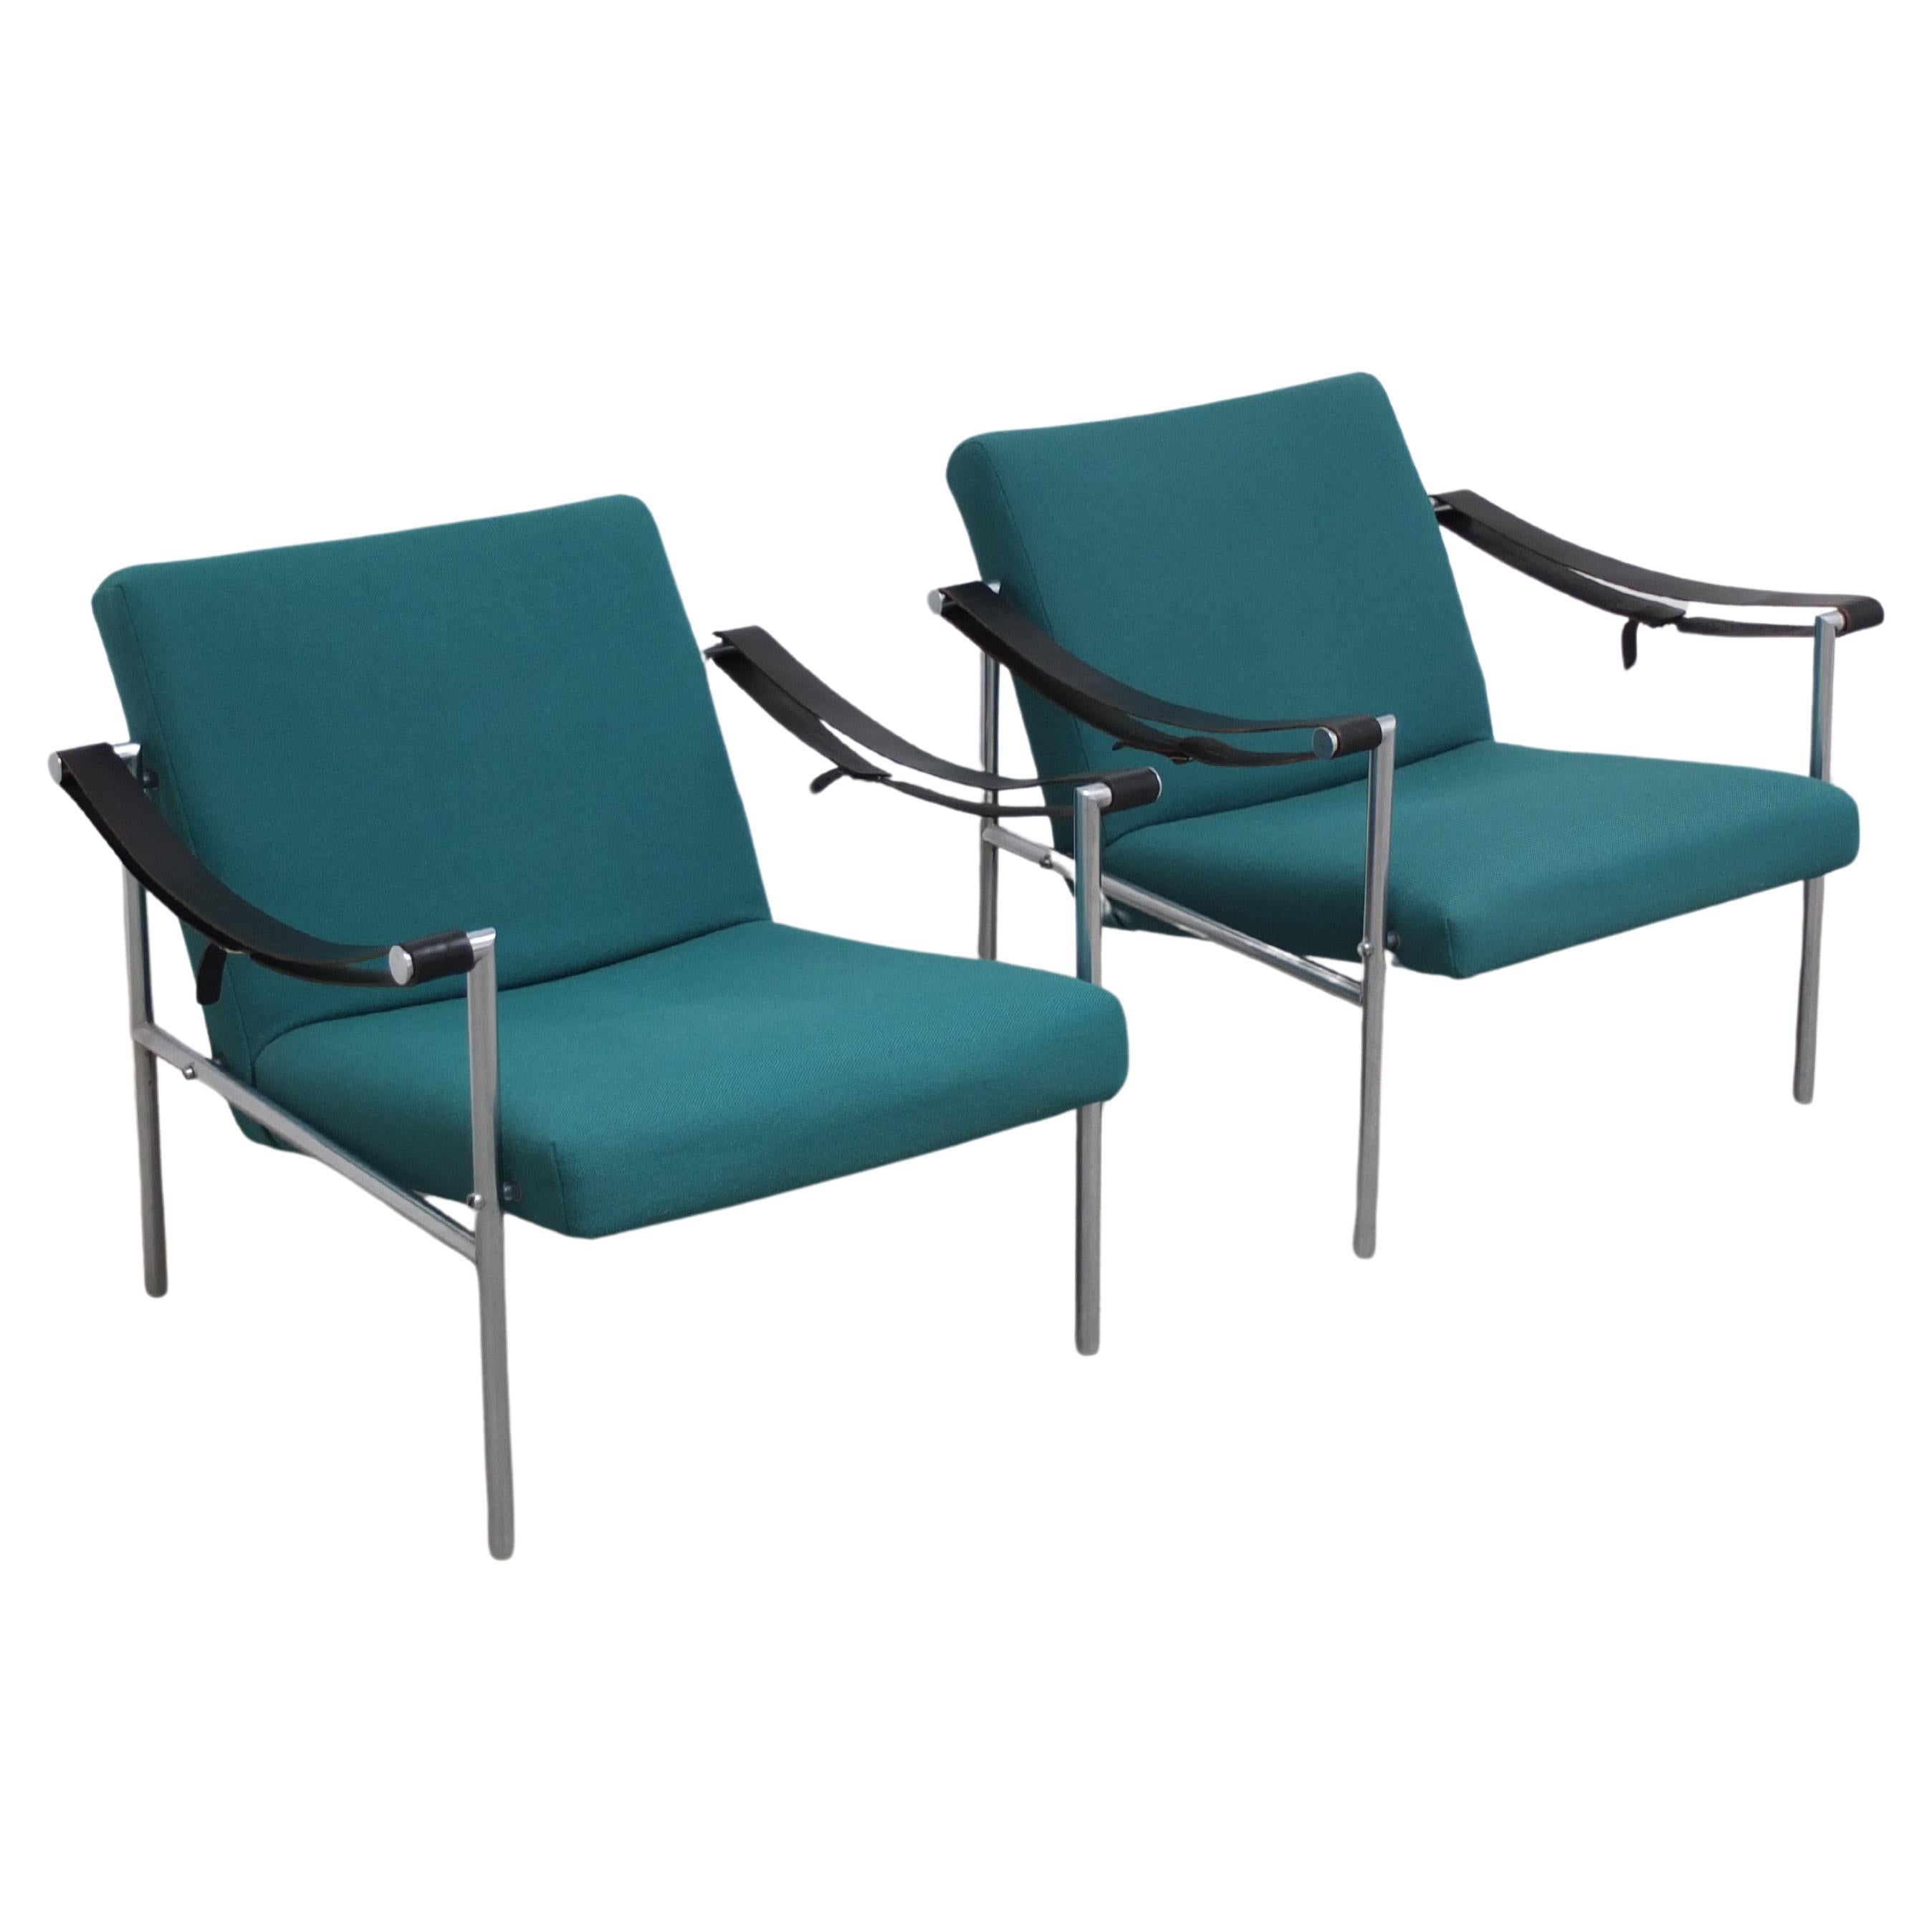 Pair of 'SZ08' Lounge Chairs by Martin Visser for 't Spectrum, 1960